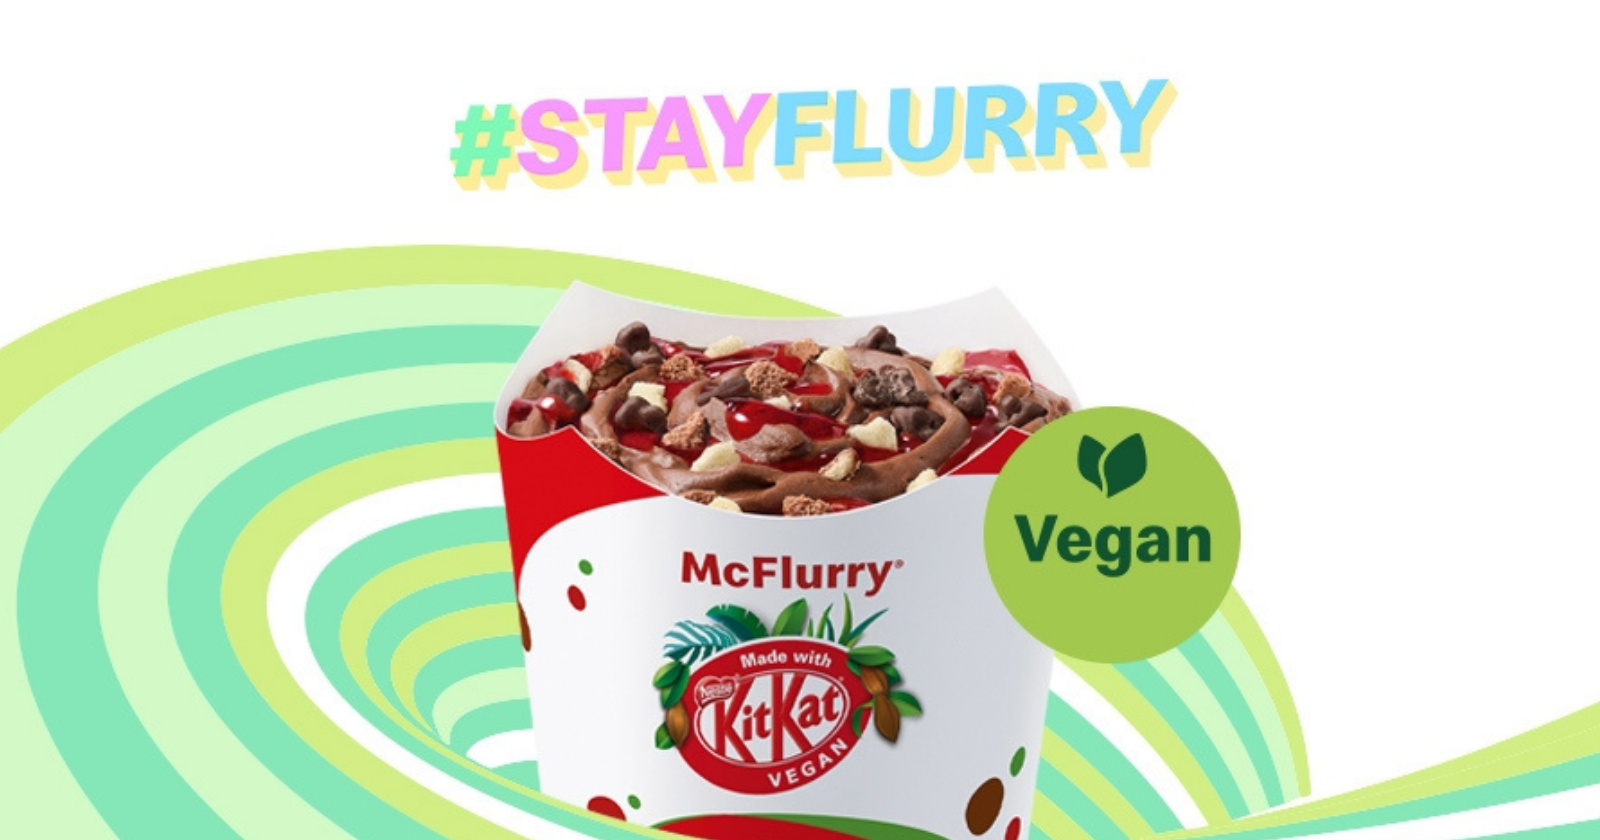 In Germany, McDonald's is launching a vegan McFlurry with KitKat chocolate